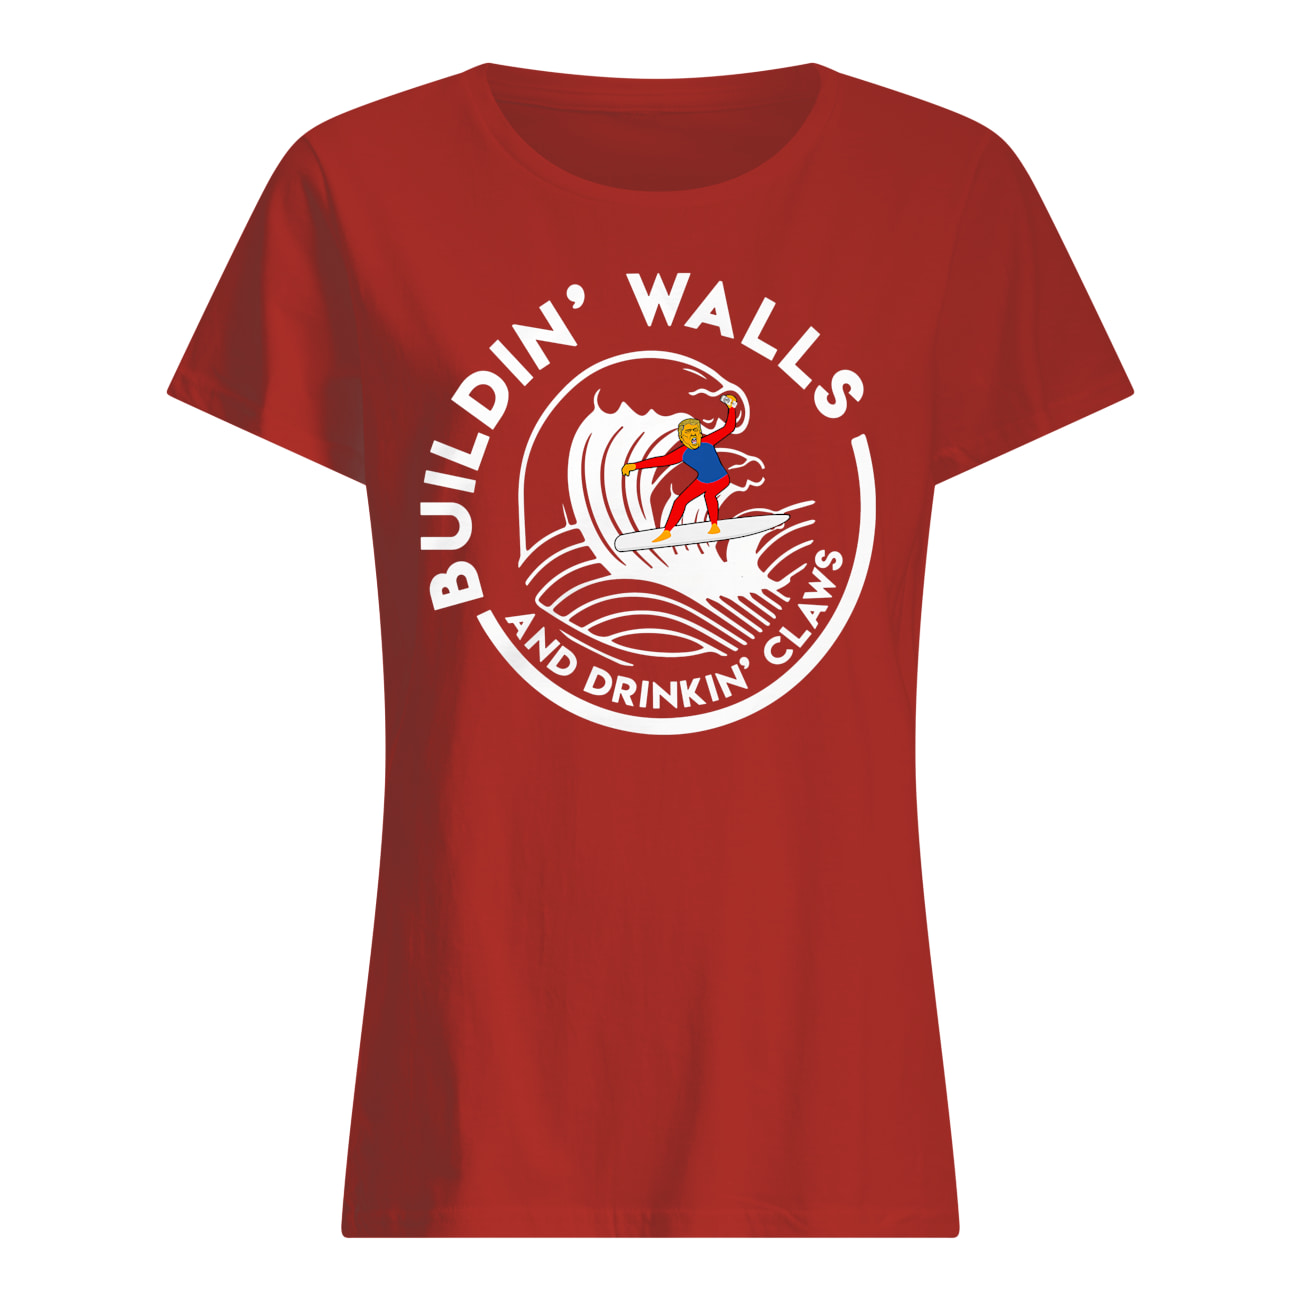 Buildin walls and drinkin claws womens shirt